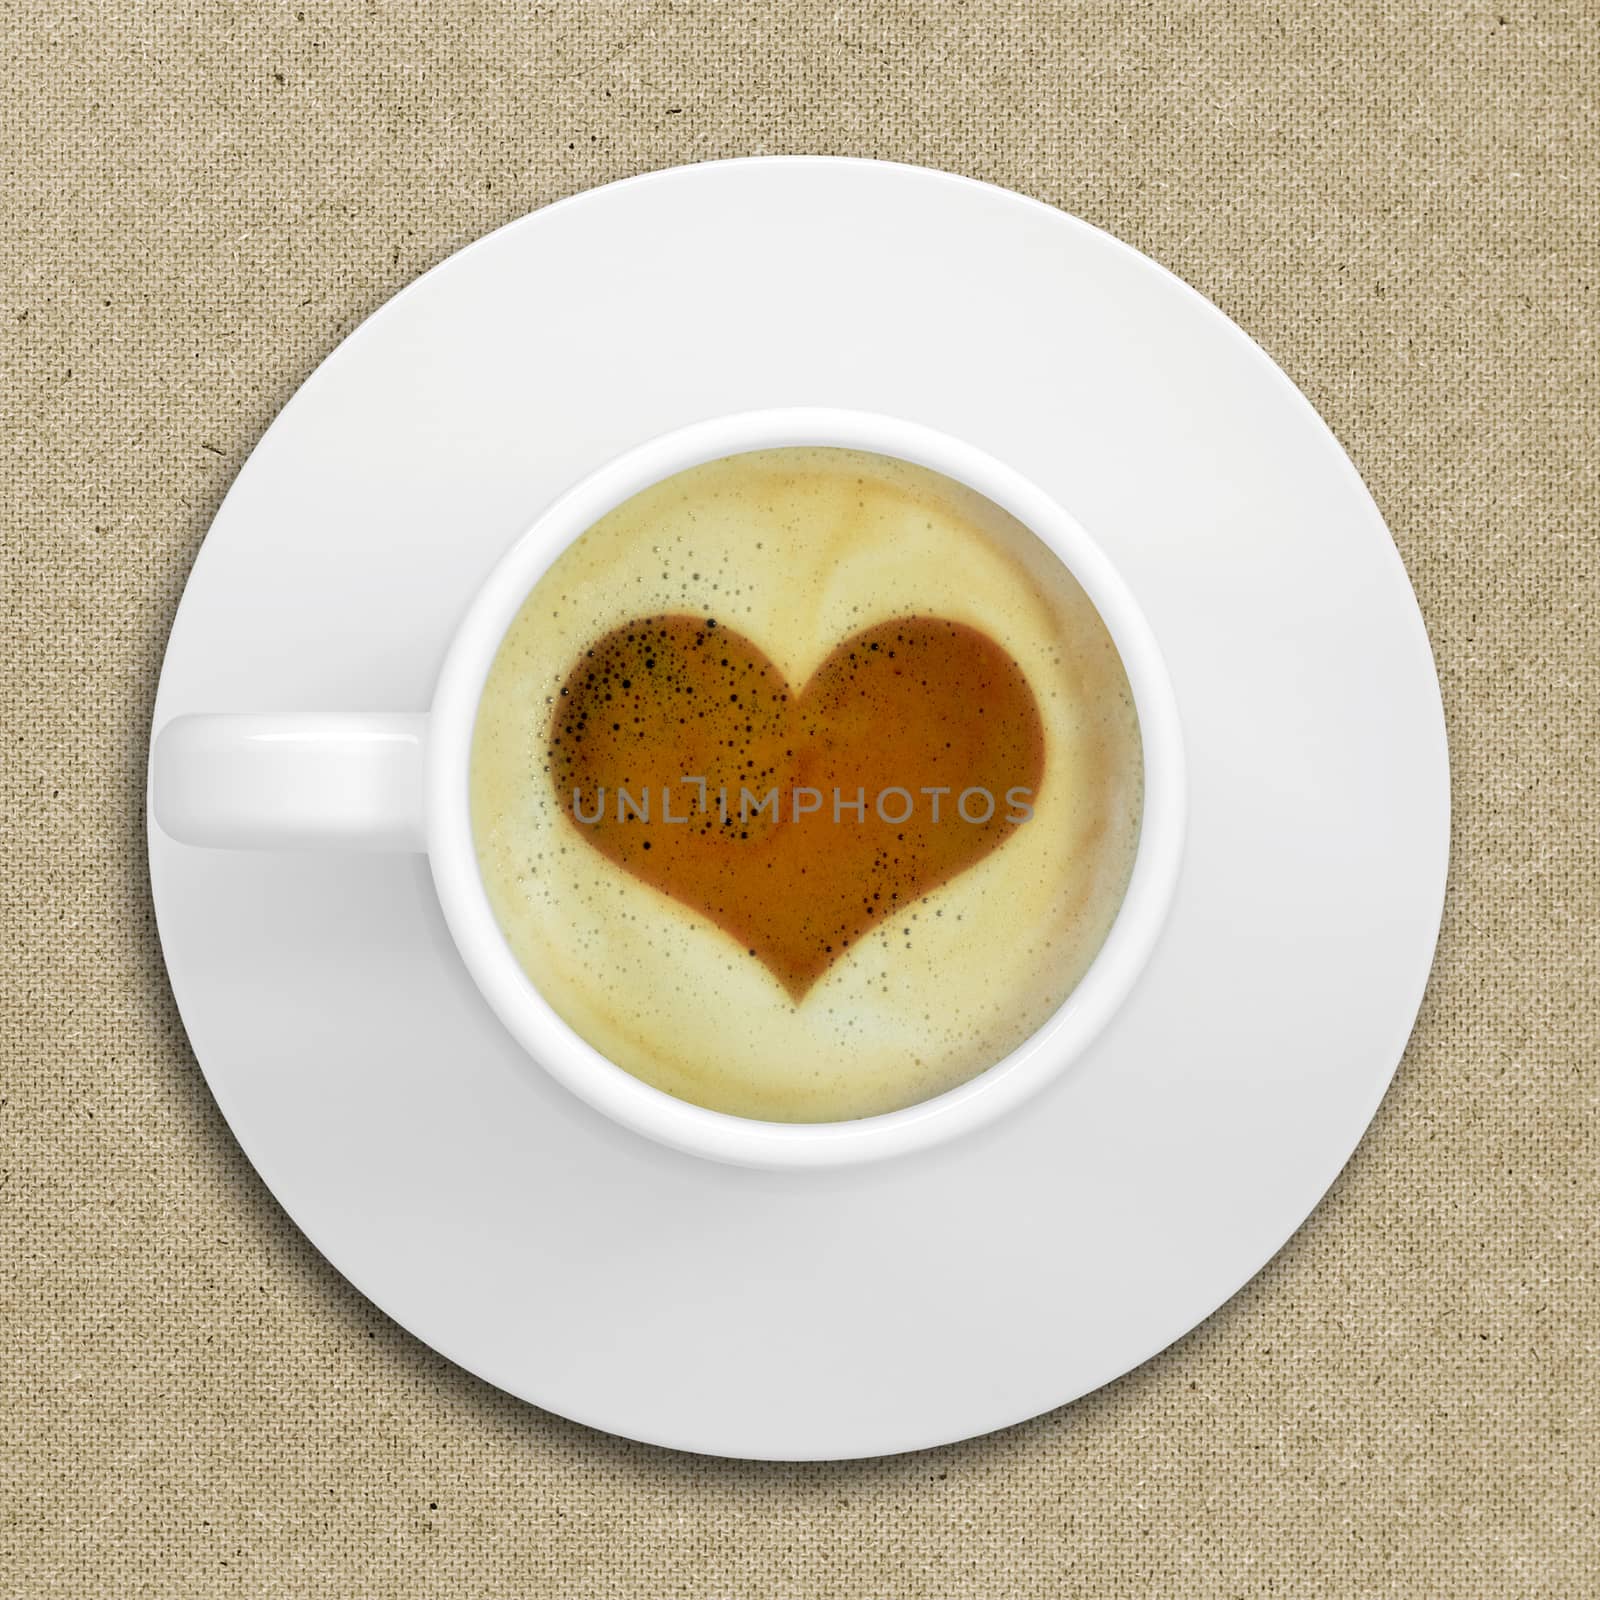 Picture of the heart in the coffee foam by cherezoff